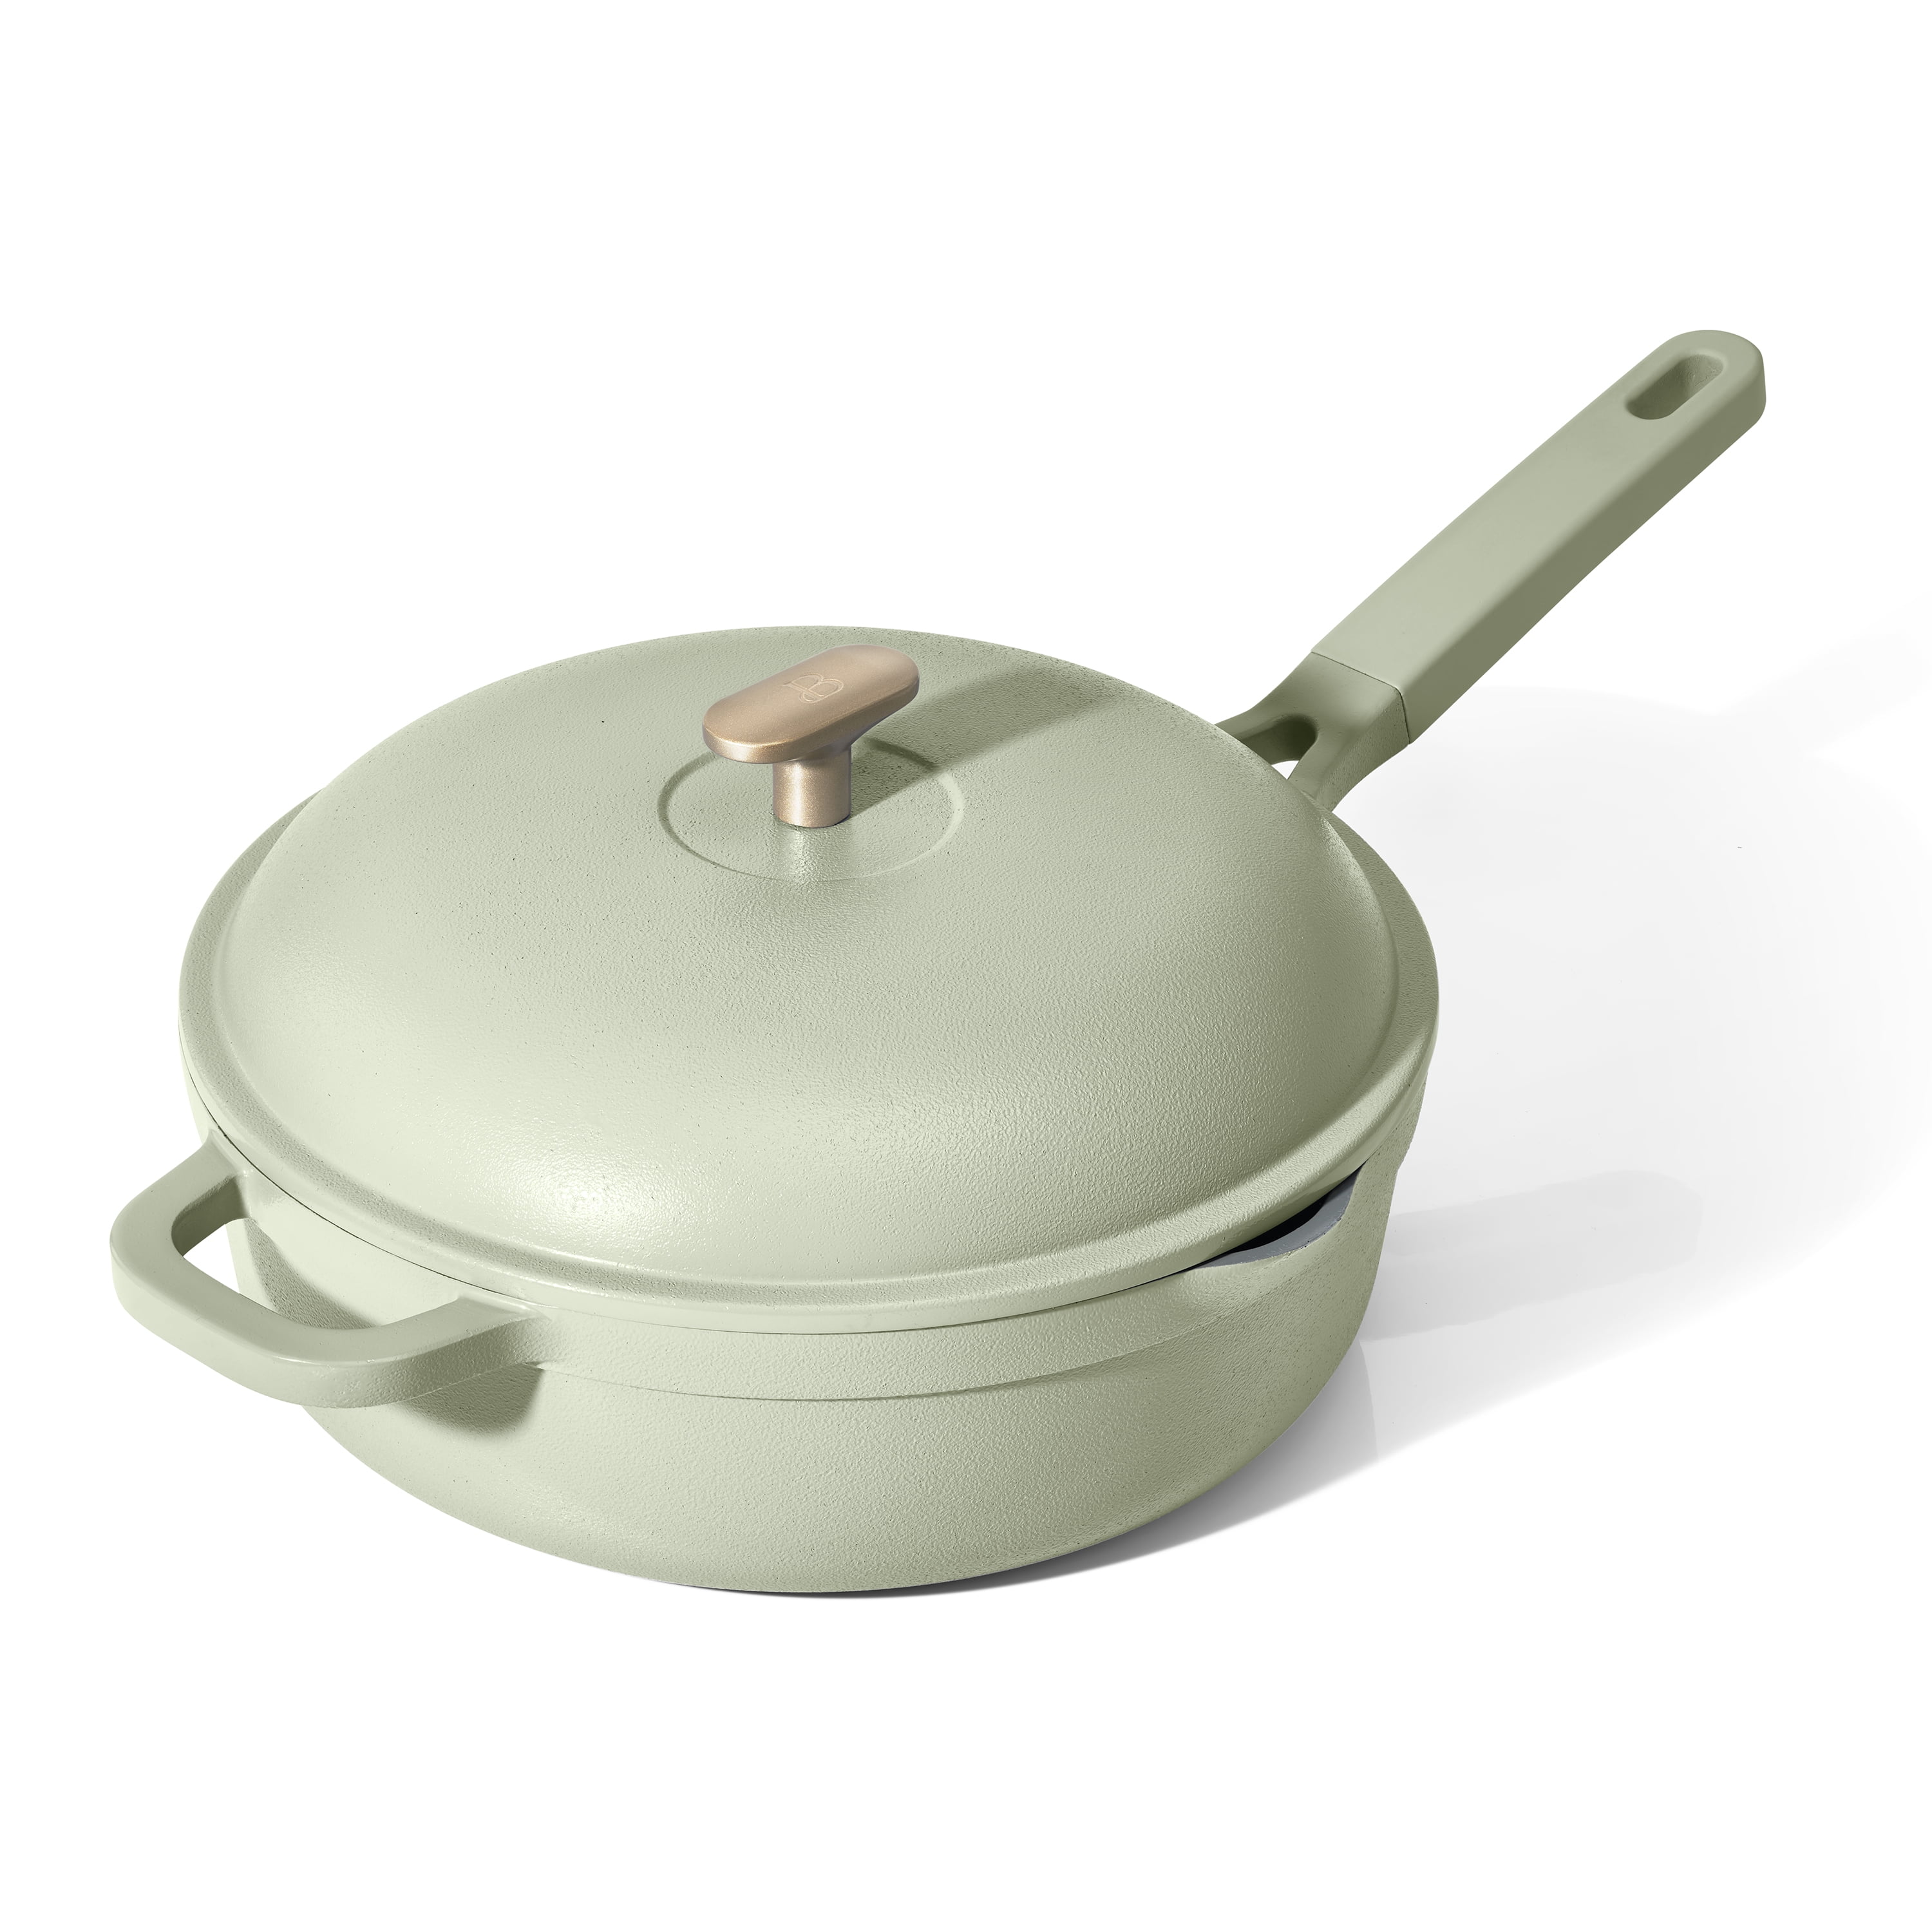 Cuisinart Custom-Clad 5-Ply Stainless Steel Saute Pan with Helper Handle &  Lid | 5.5 Qt.